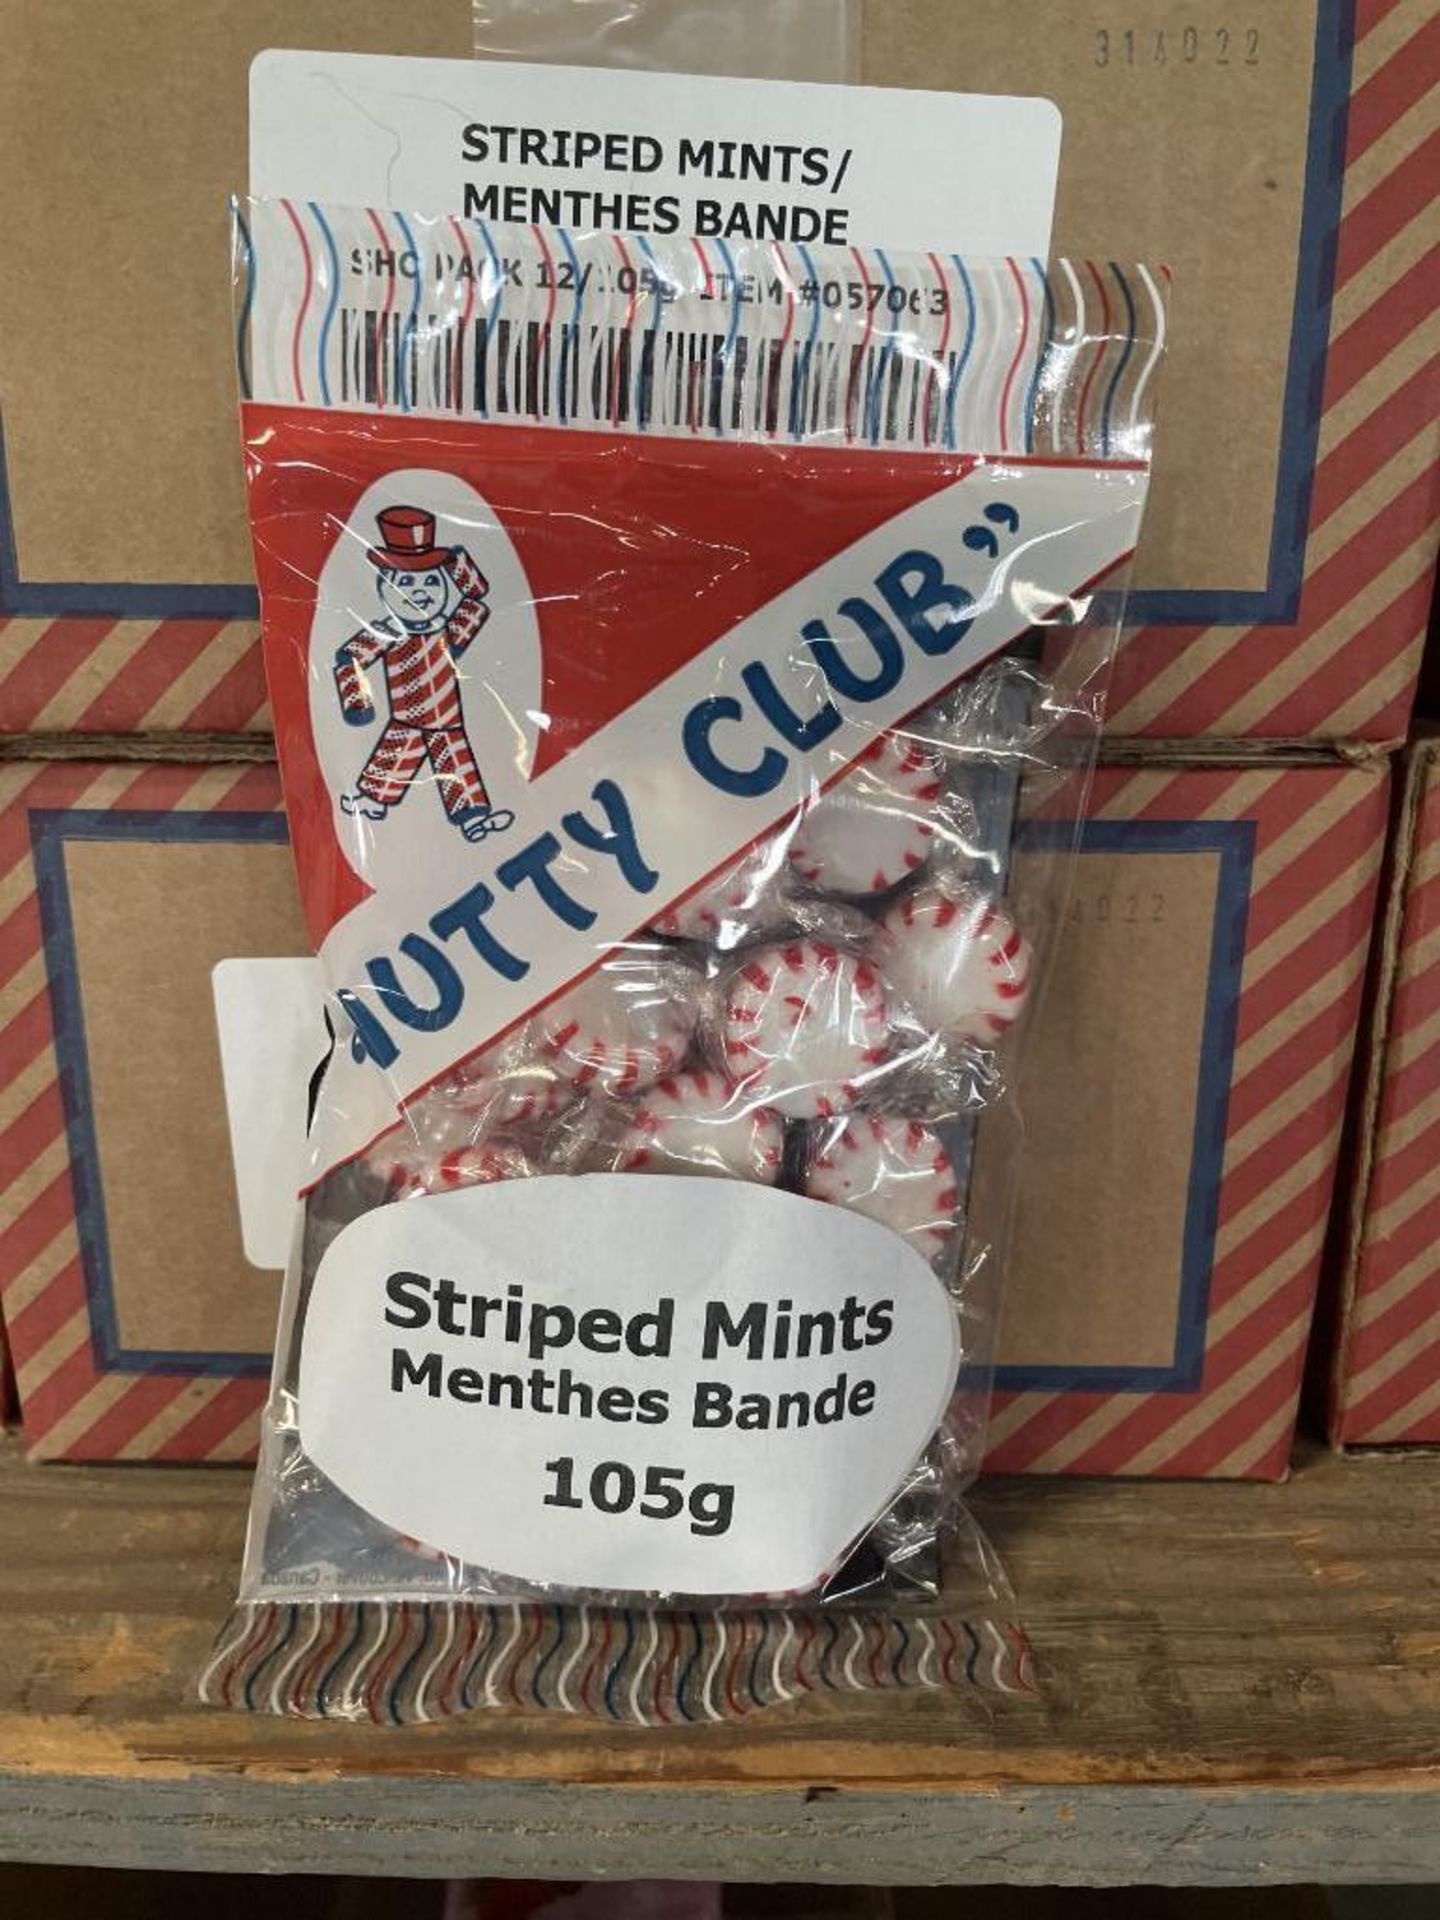 (18) CASES OF NUTTY CLUB STRIPED MINTS, 12/105G PER CASE - Image 2 of 3